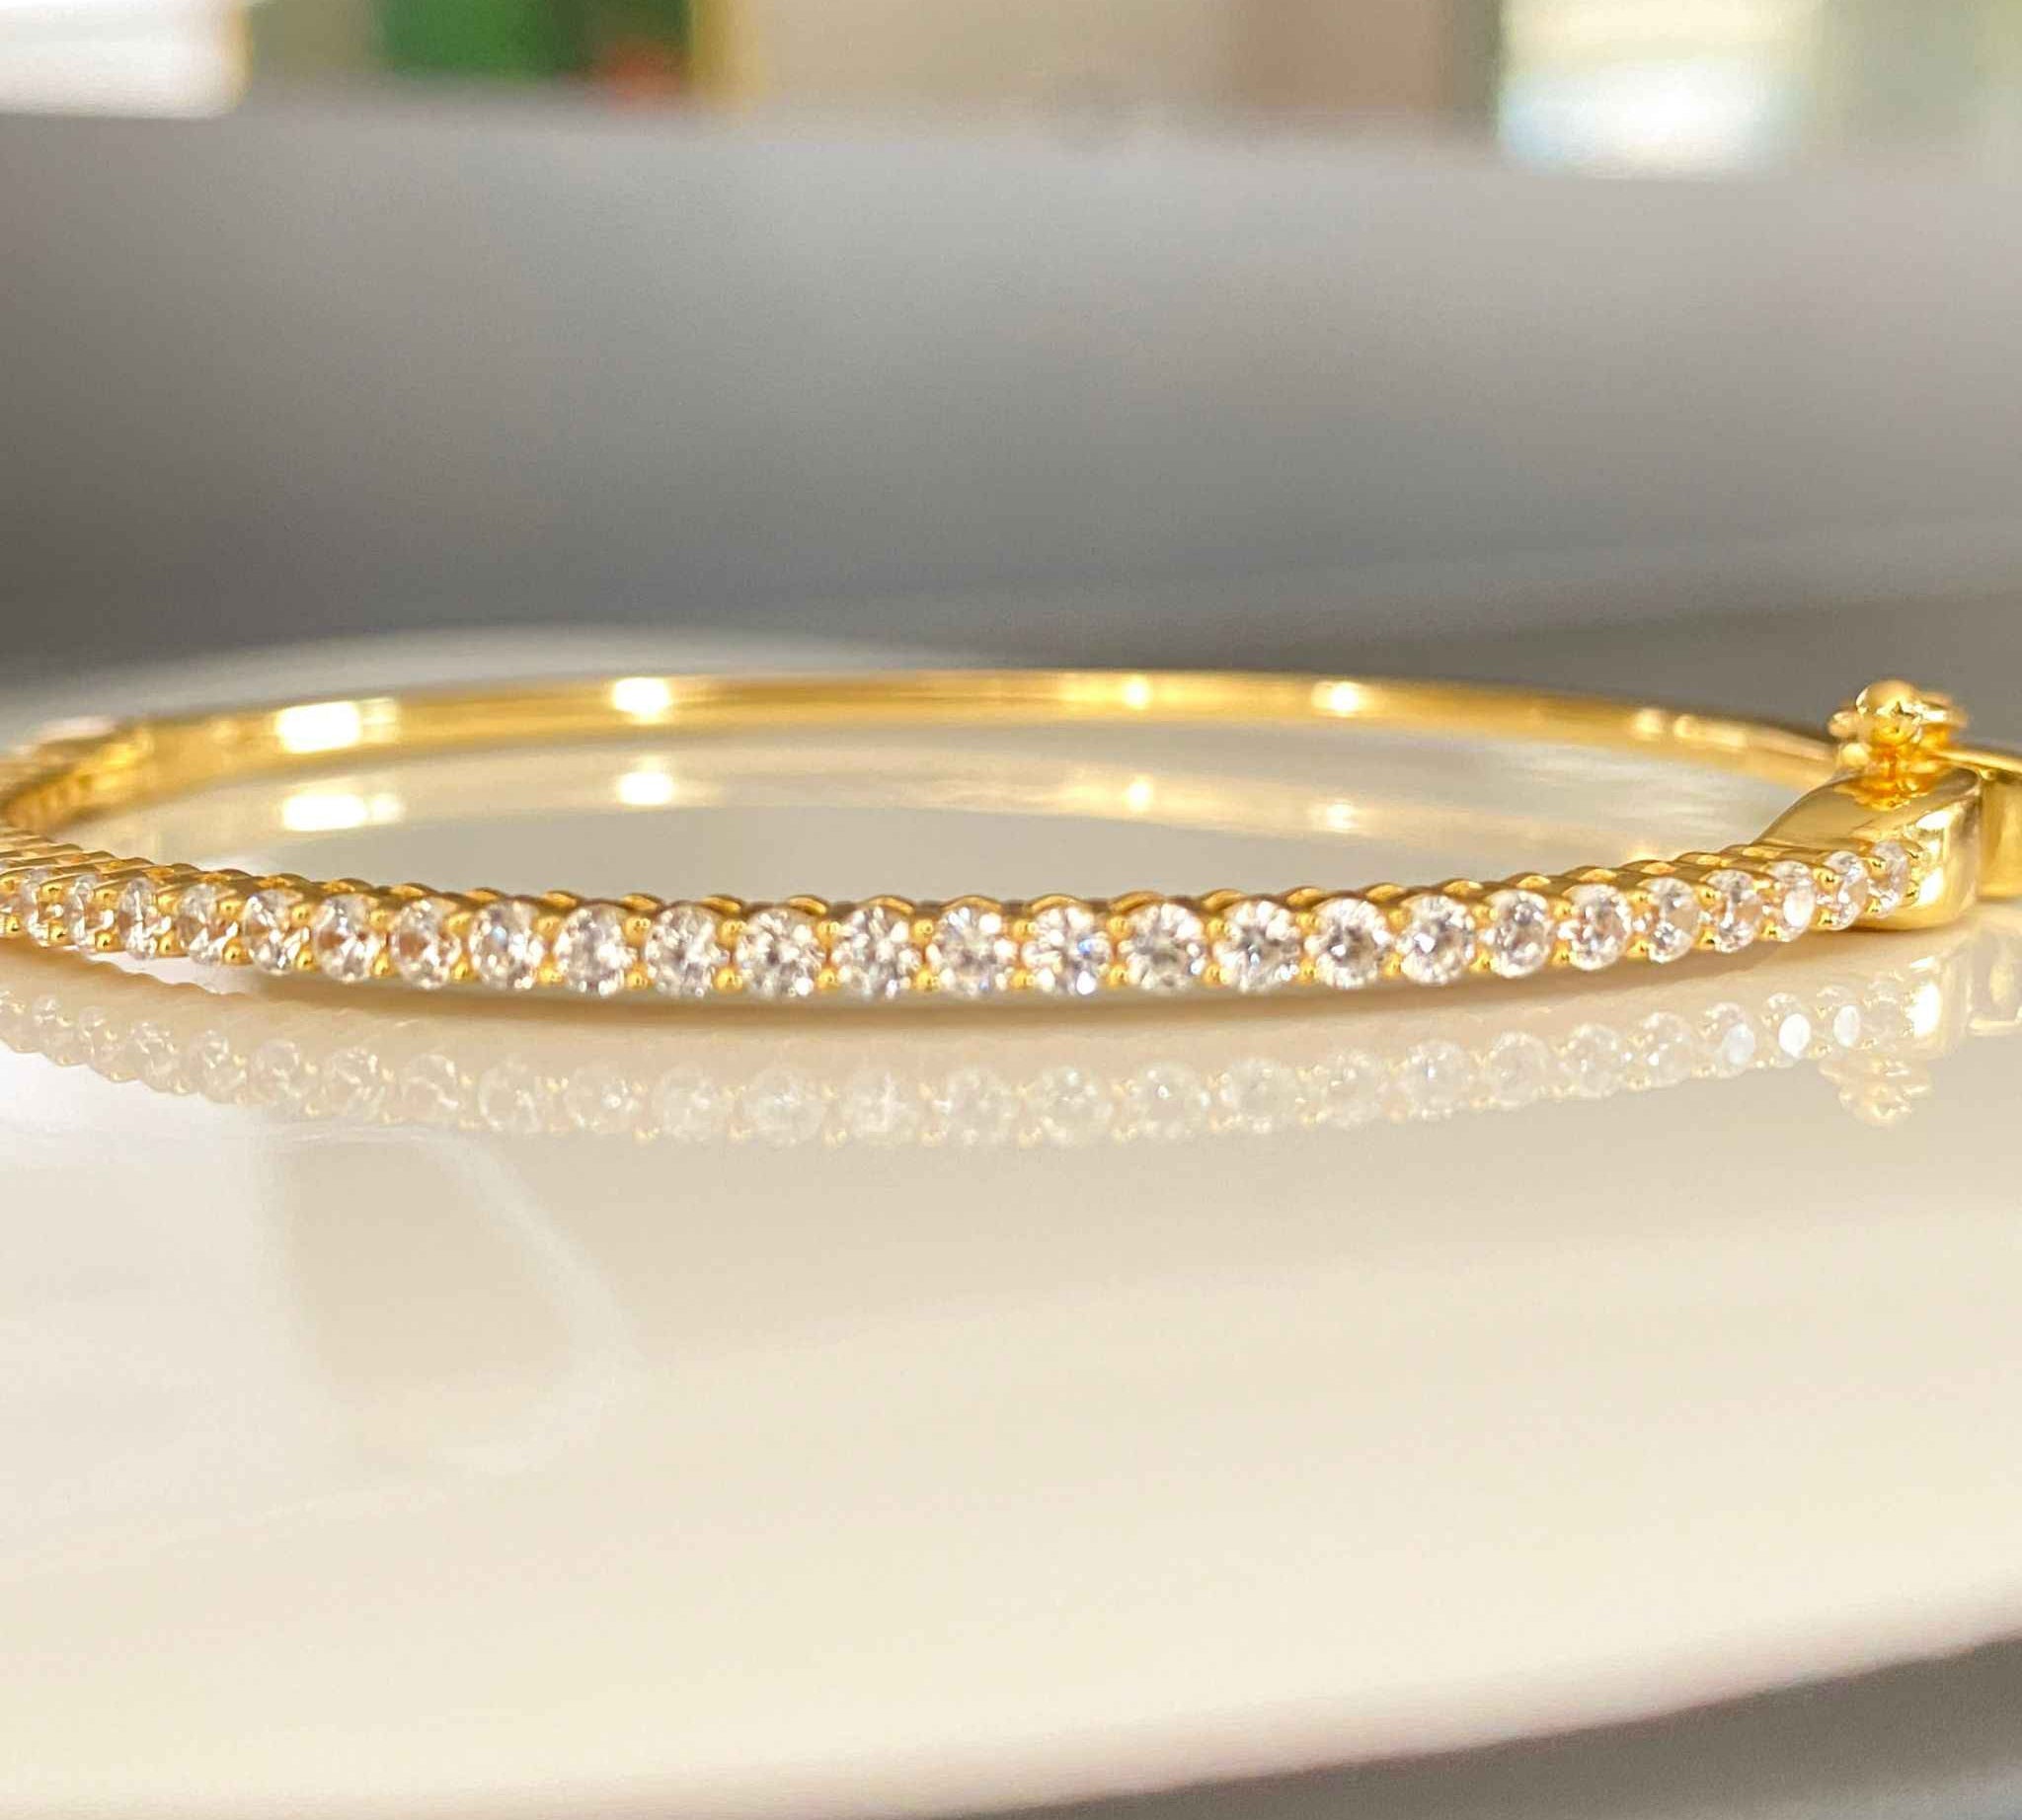 Beautiful Gold Bangle for Women - Waverly Design by Alessandra James.